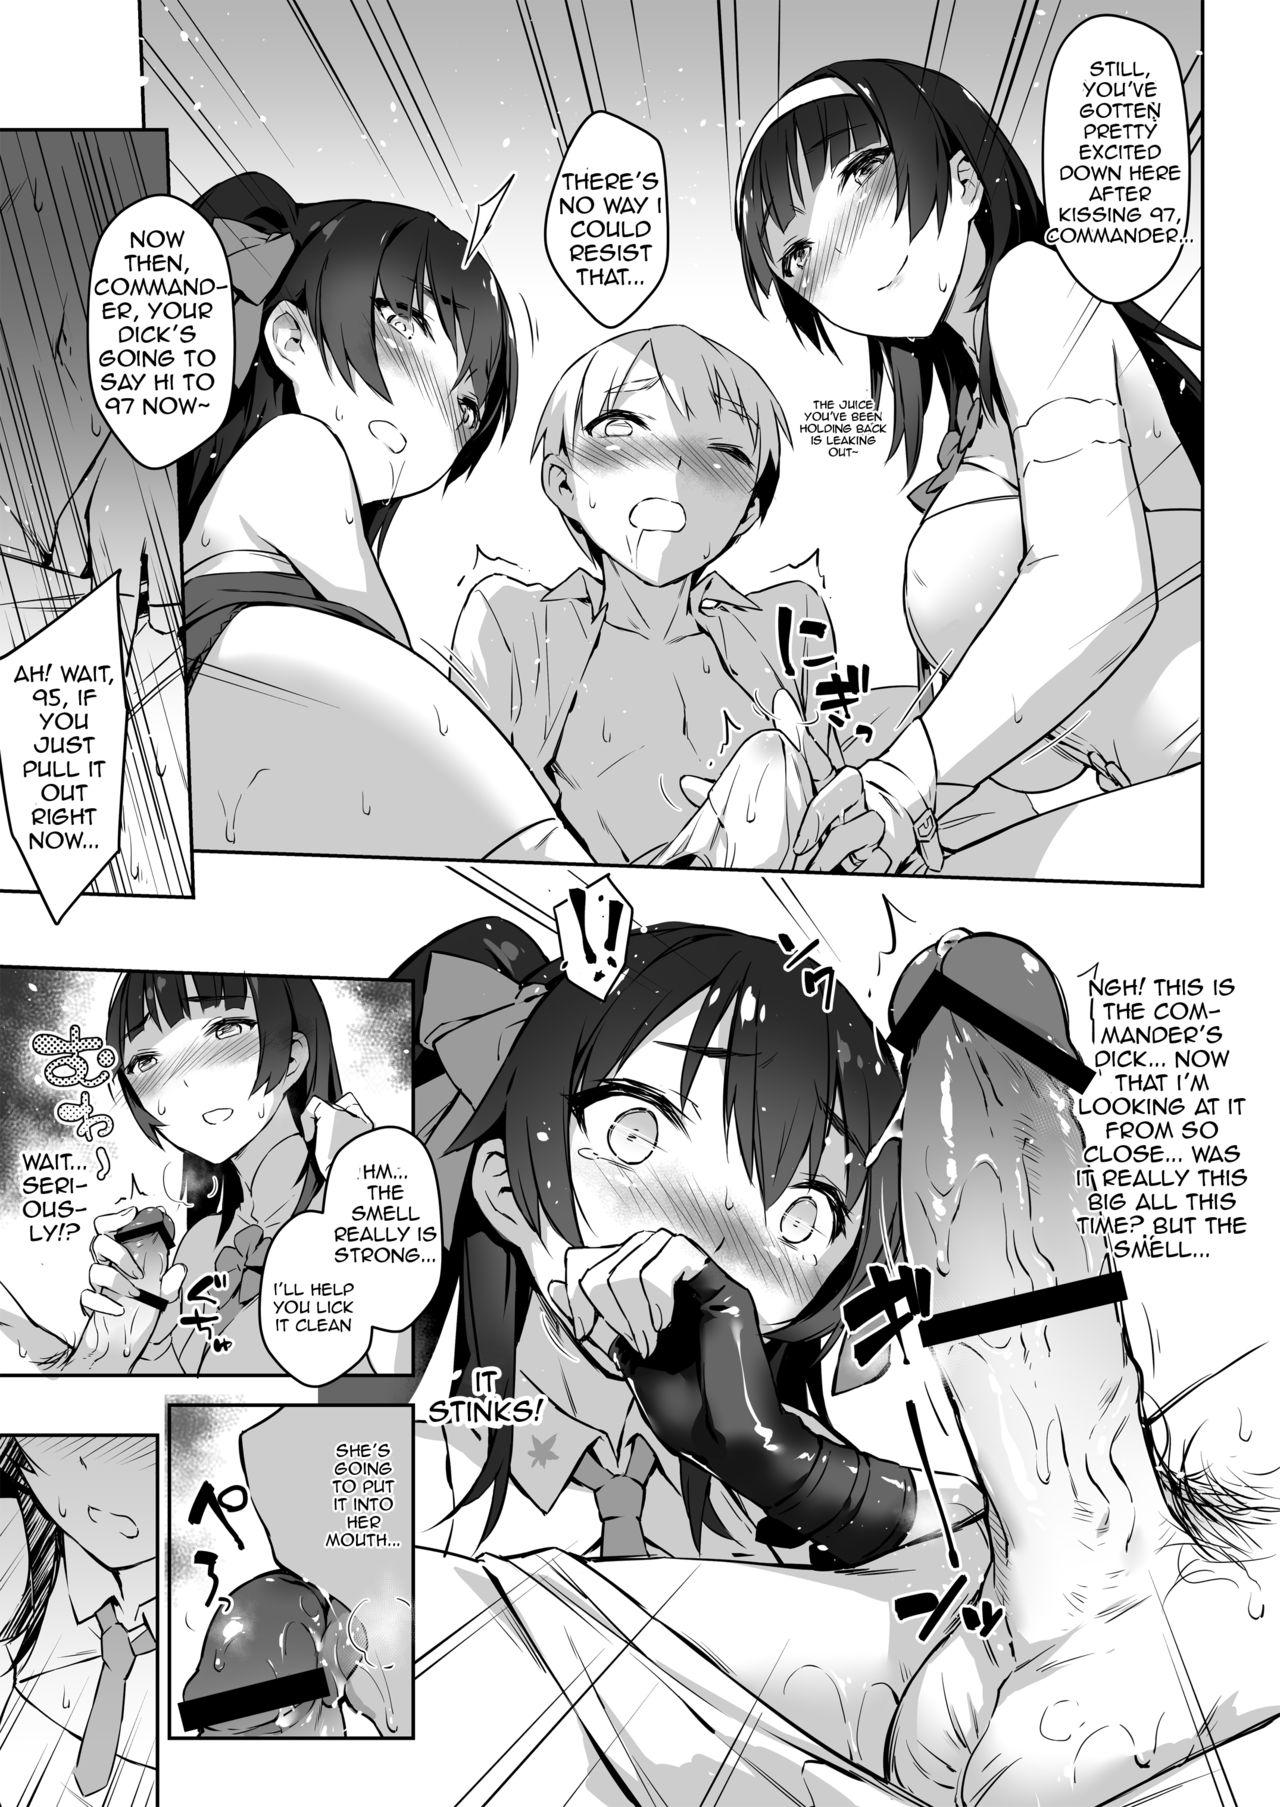 Pussy Fingering Type 95 Type 97, Let Your Big Sister Teach You! - Girls frontline European Porn - Page 11